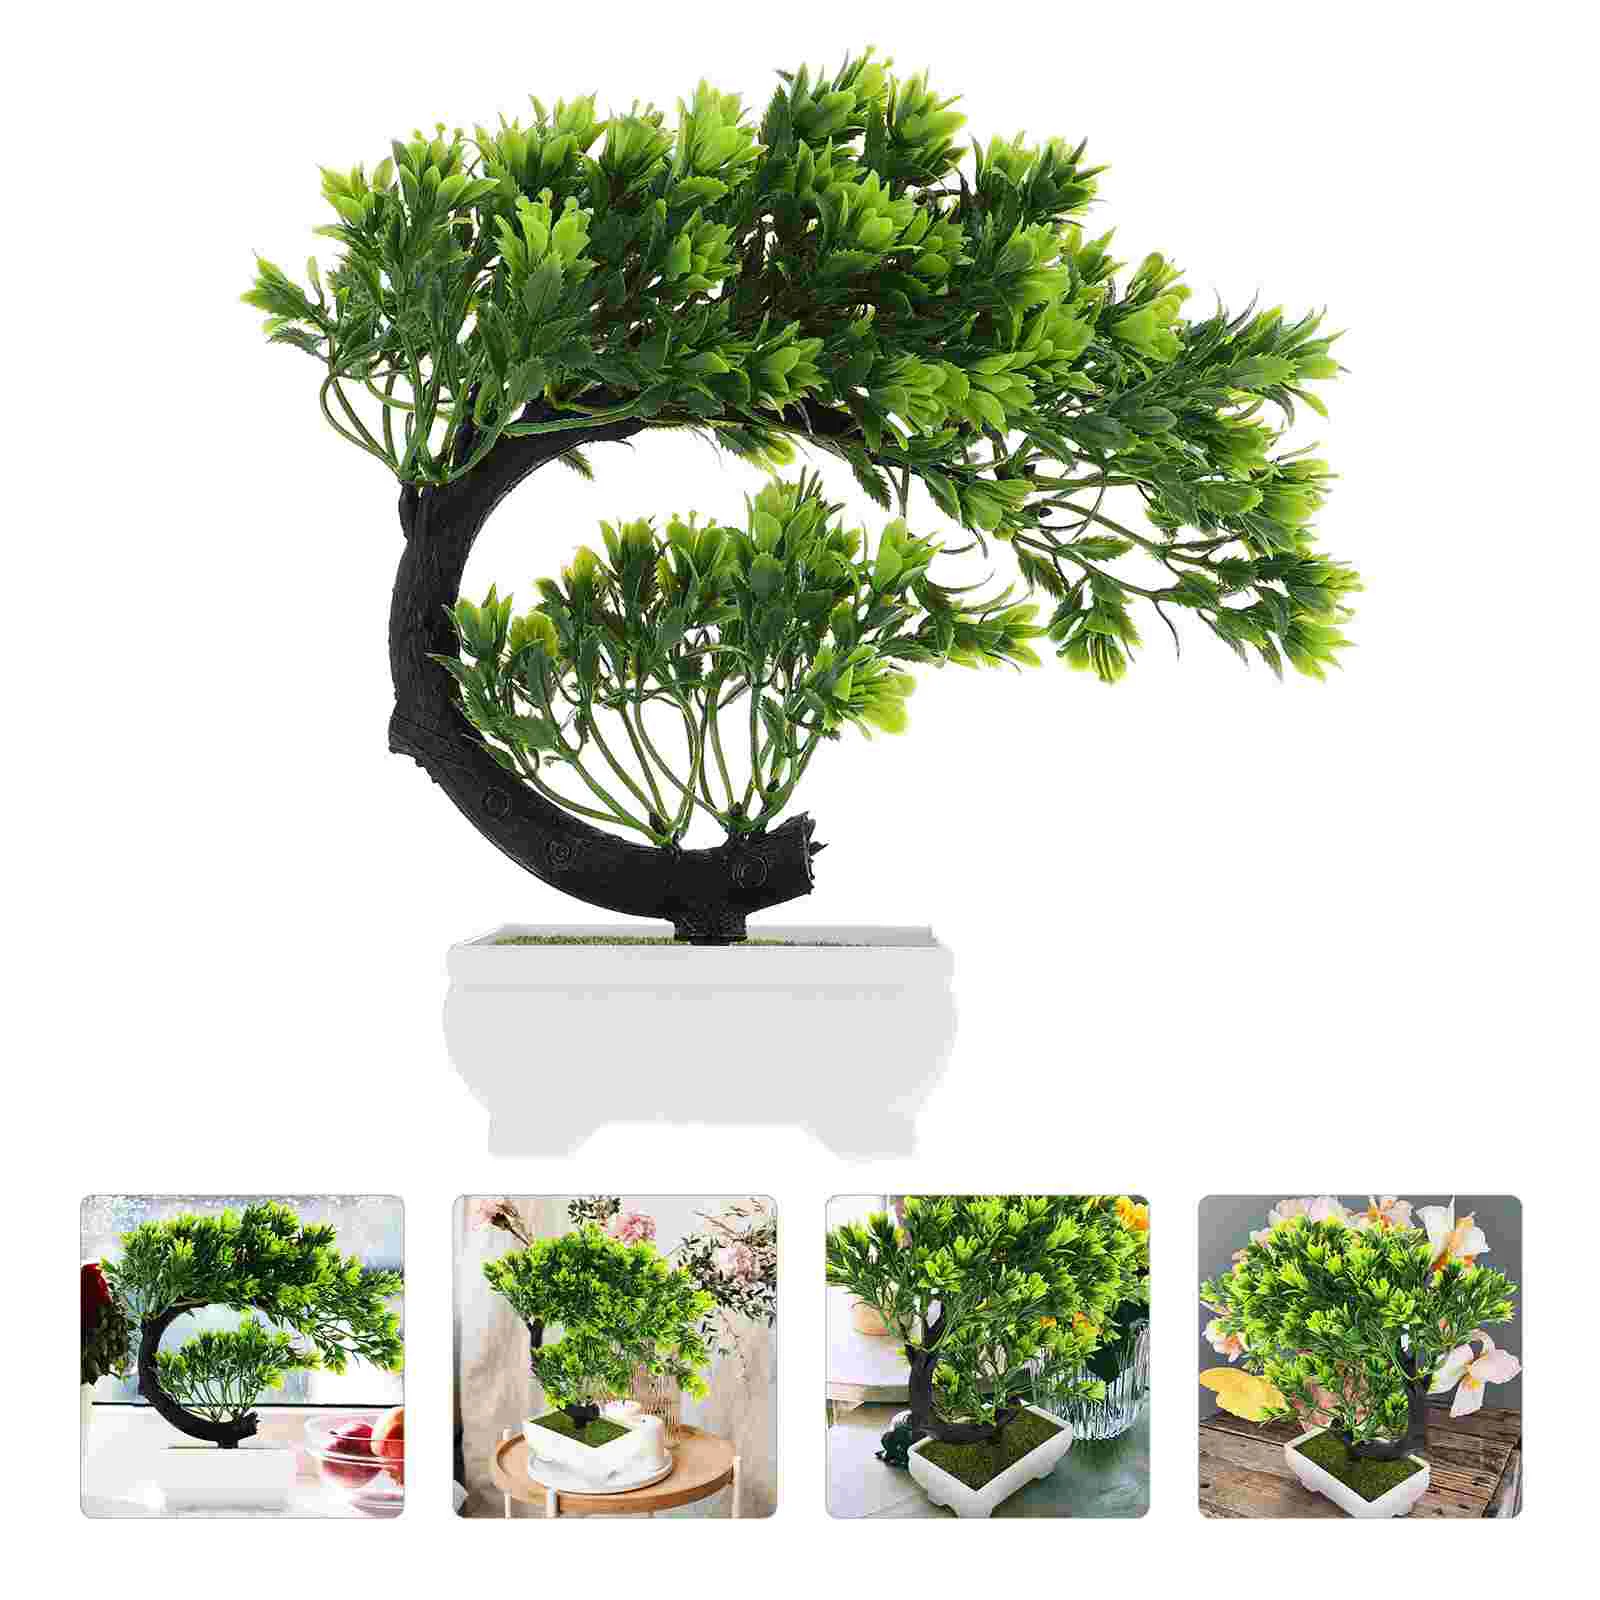 

Bonsai Tree Artificial Fake Potted Pine Realistic Faux Flower Decor Welcoming Ornament Topiary Shrubs Decorative Brussel Indoor